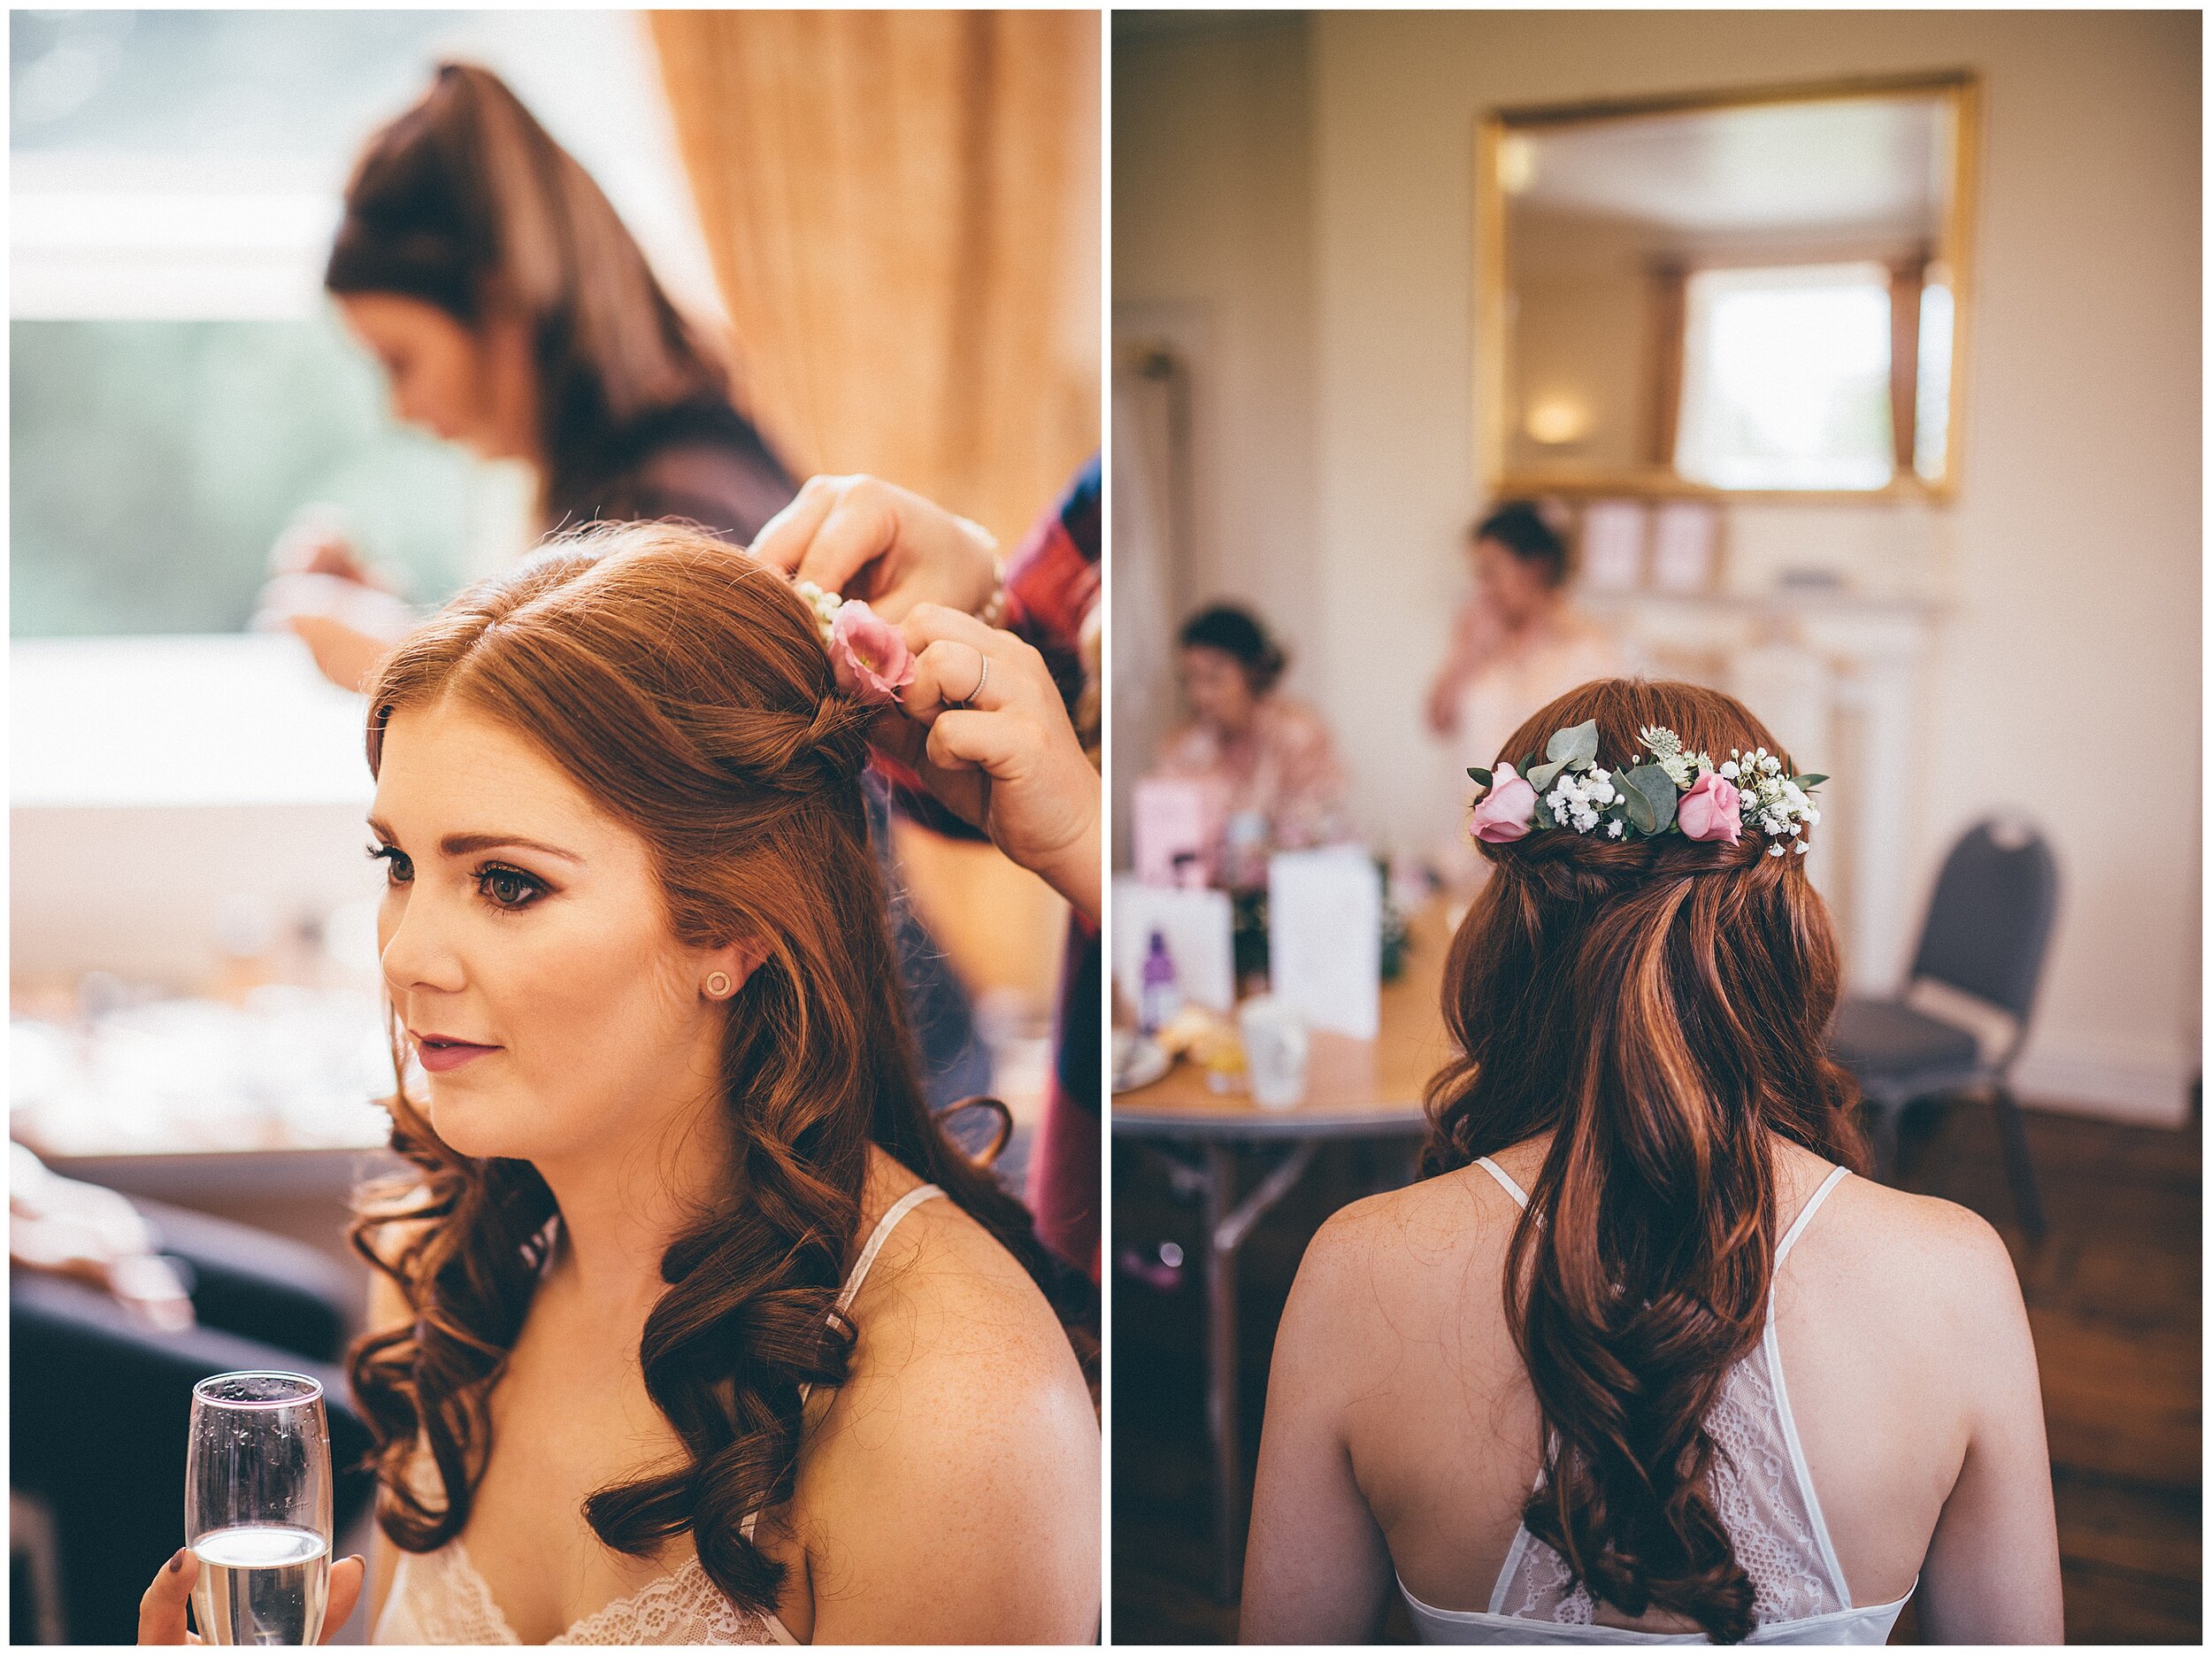 Bride gets her hair done on her wedding morning.